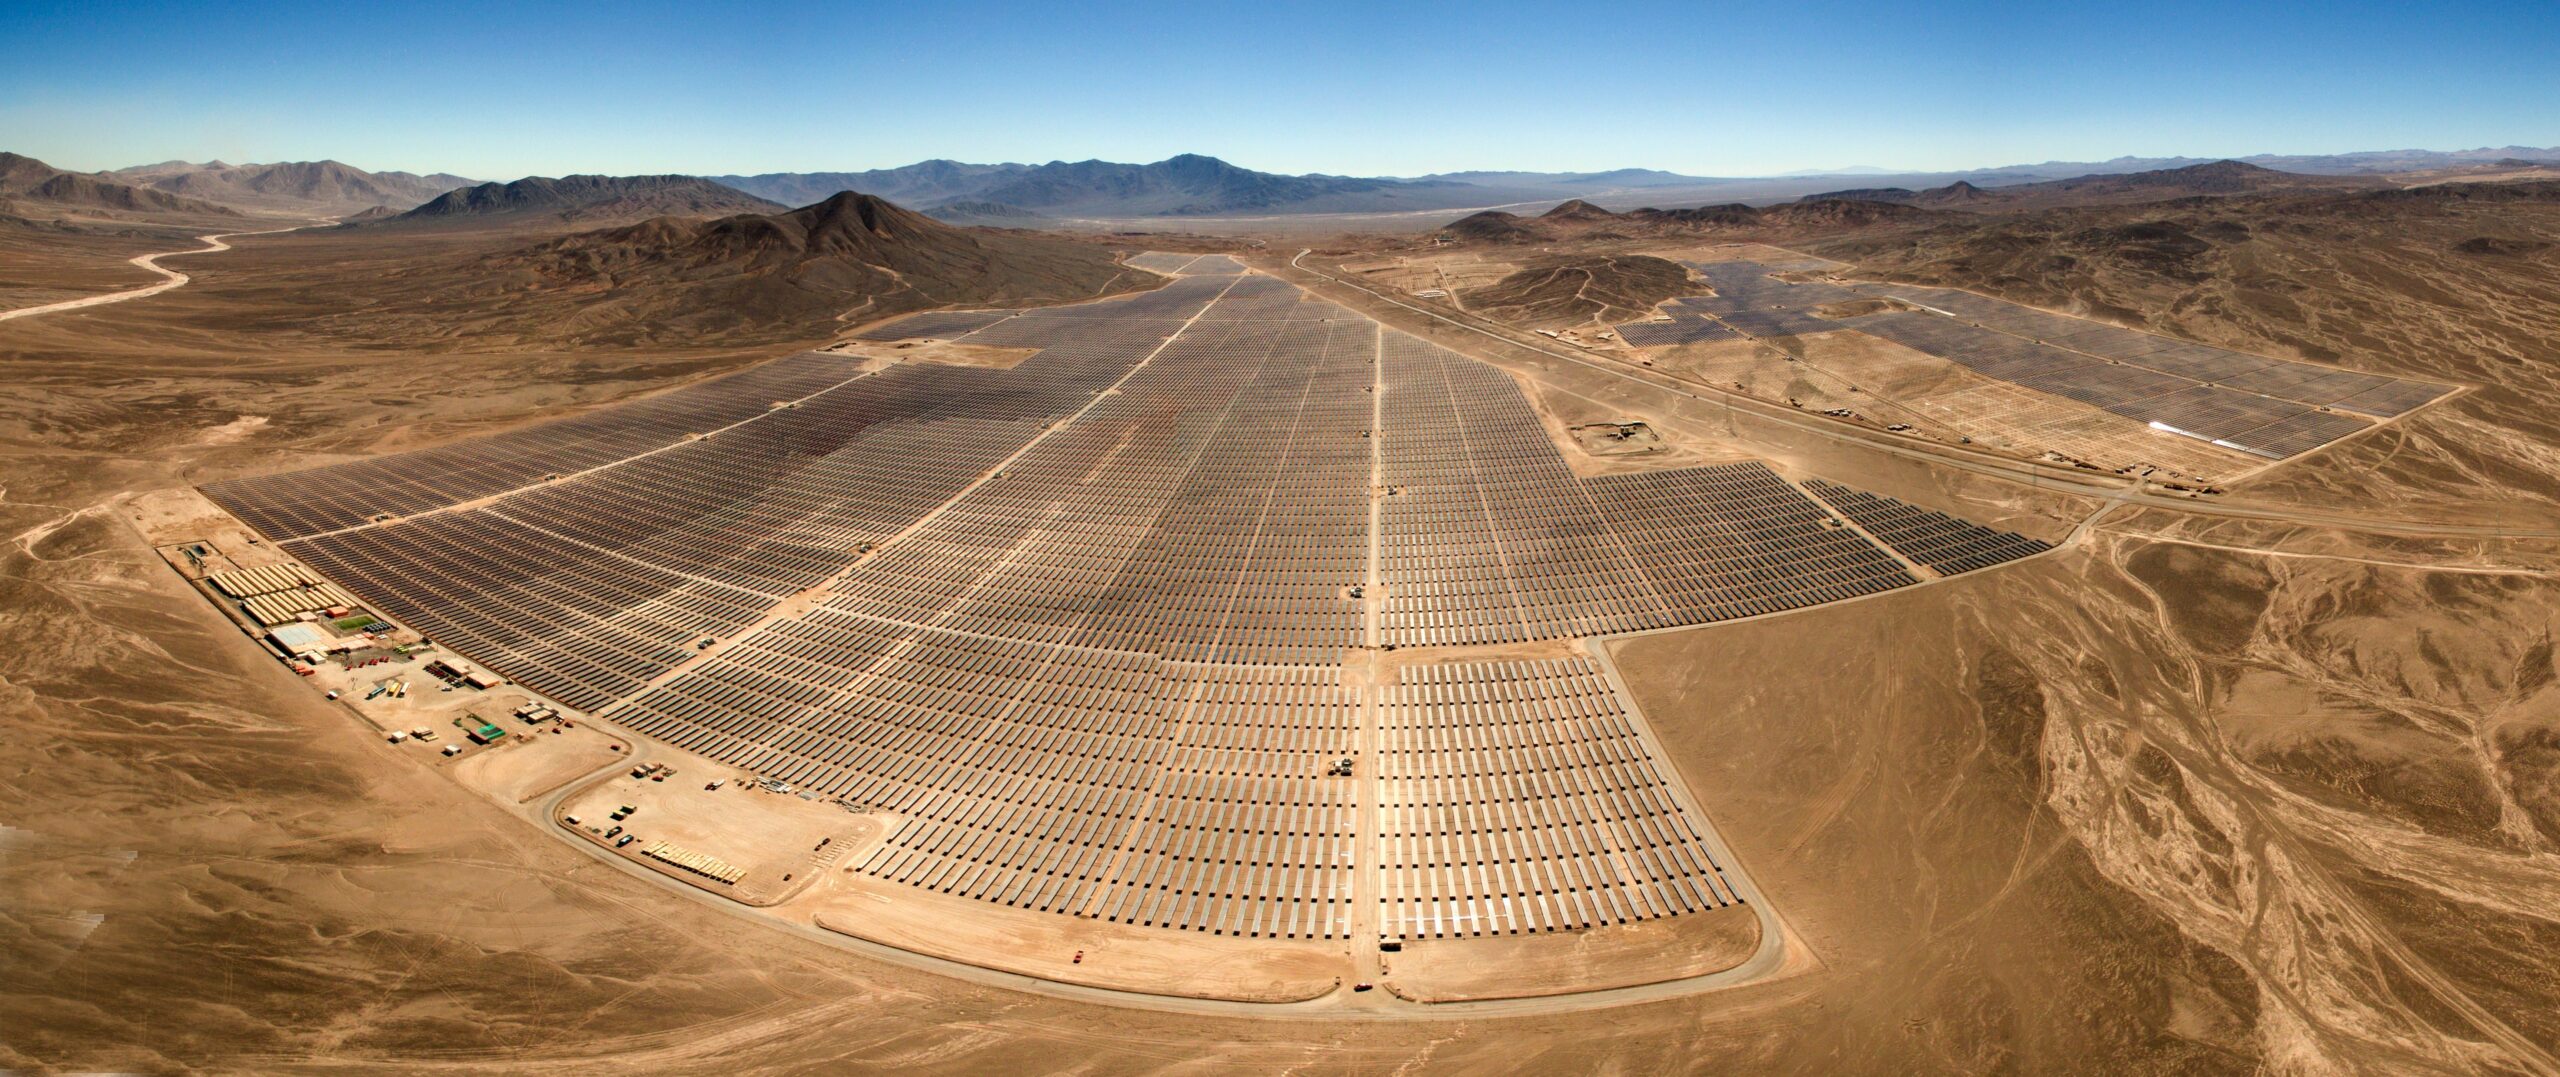 Aerial view of a large-scale solar farm in a desert landscape, highlighting the expansive nature of commercial solar installations.